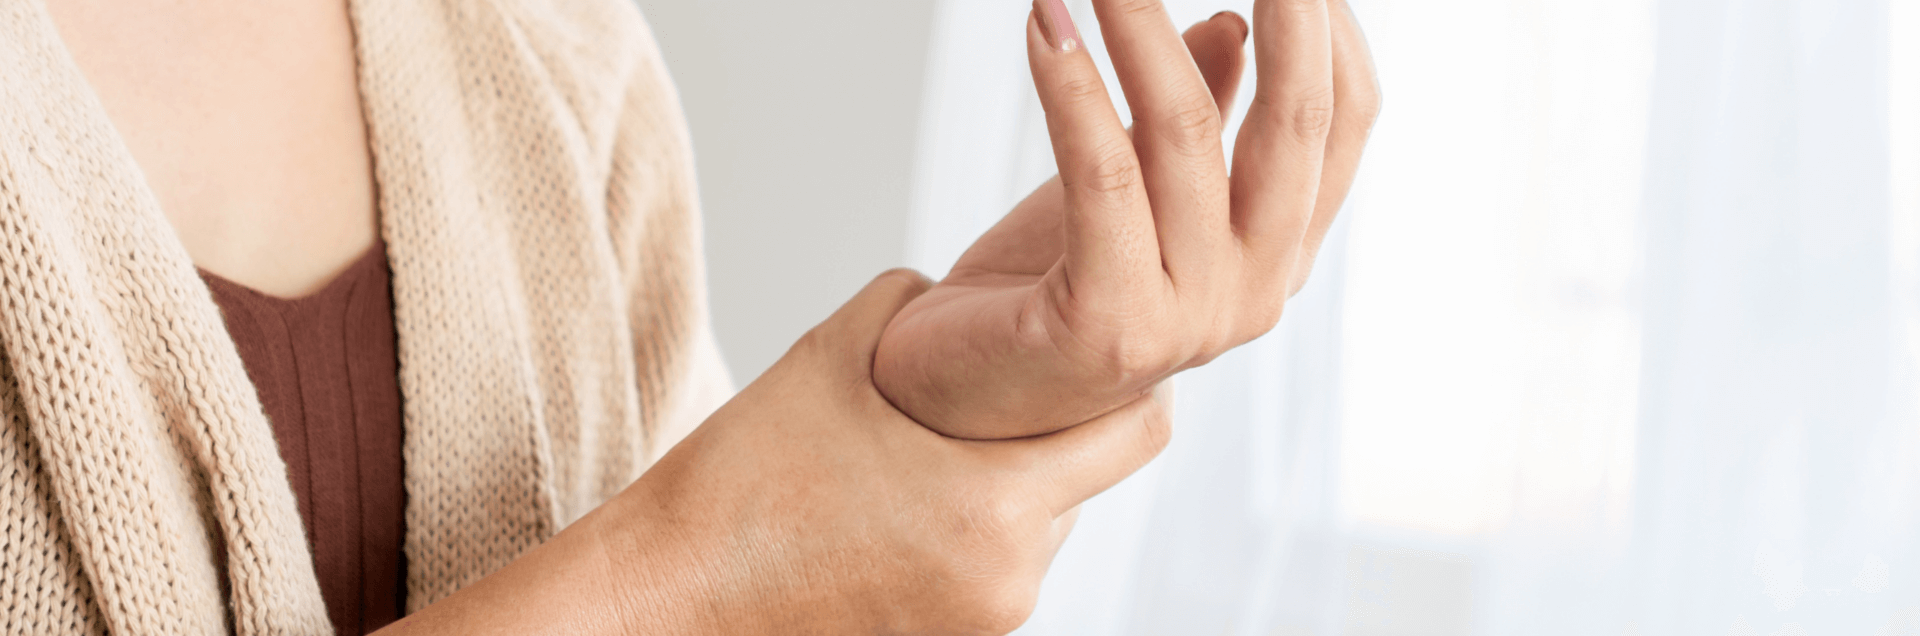 easing joint pain with tcm - hands held up as if rubbing due to soreness